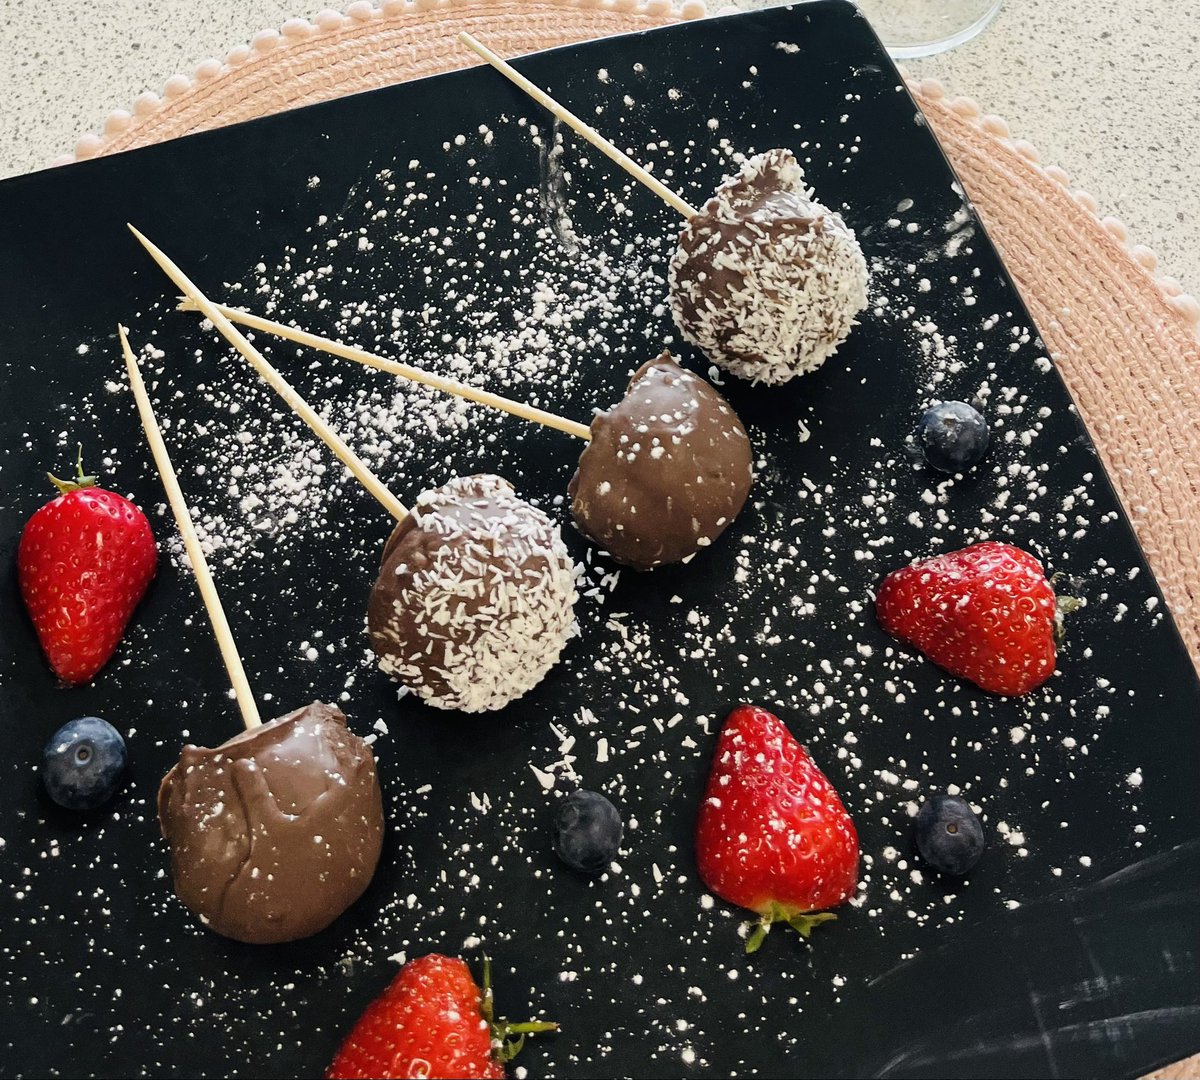 Well done to all the S3 pupils who took part in our Hamlyns competition. They created new oat recipes to feature on Hamlyns website. The winning dish was Fruity Oat Pops! 👏 Thank you @hamlynsoats for supplying oats and for coming in to judge! ✨